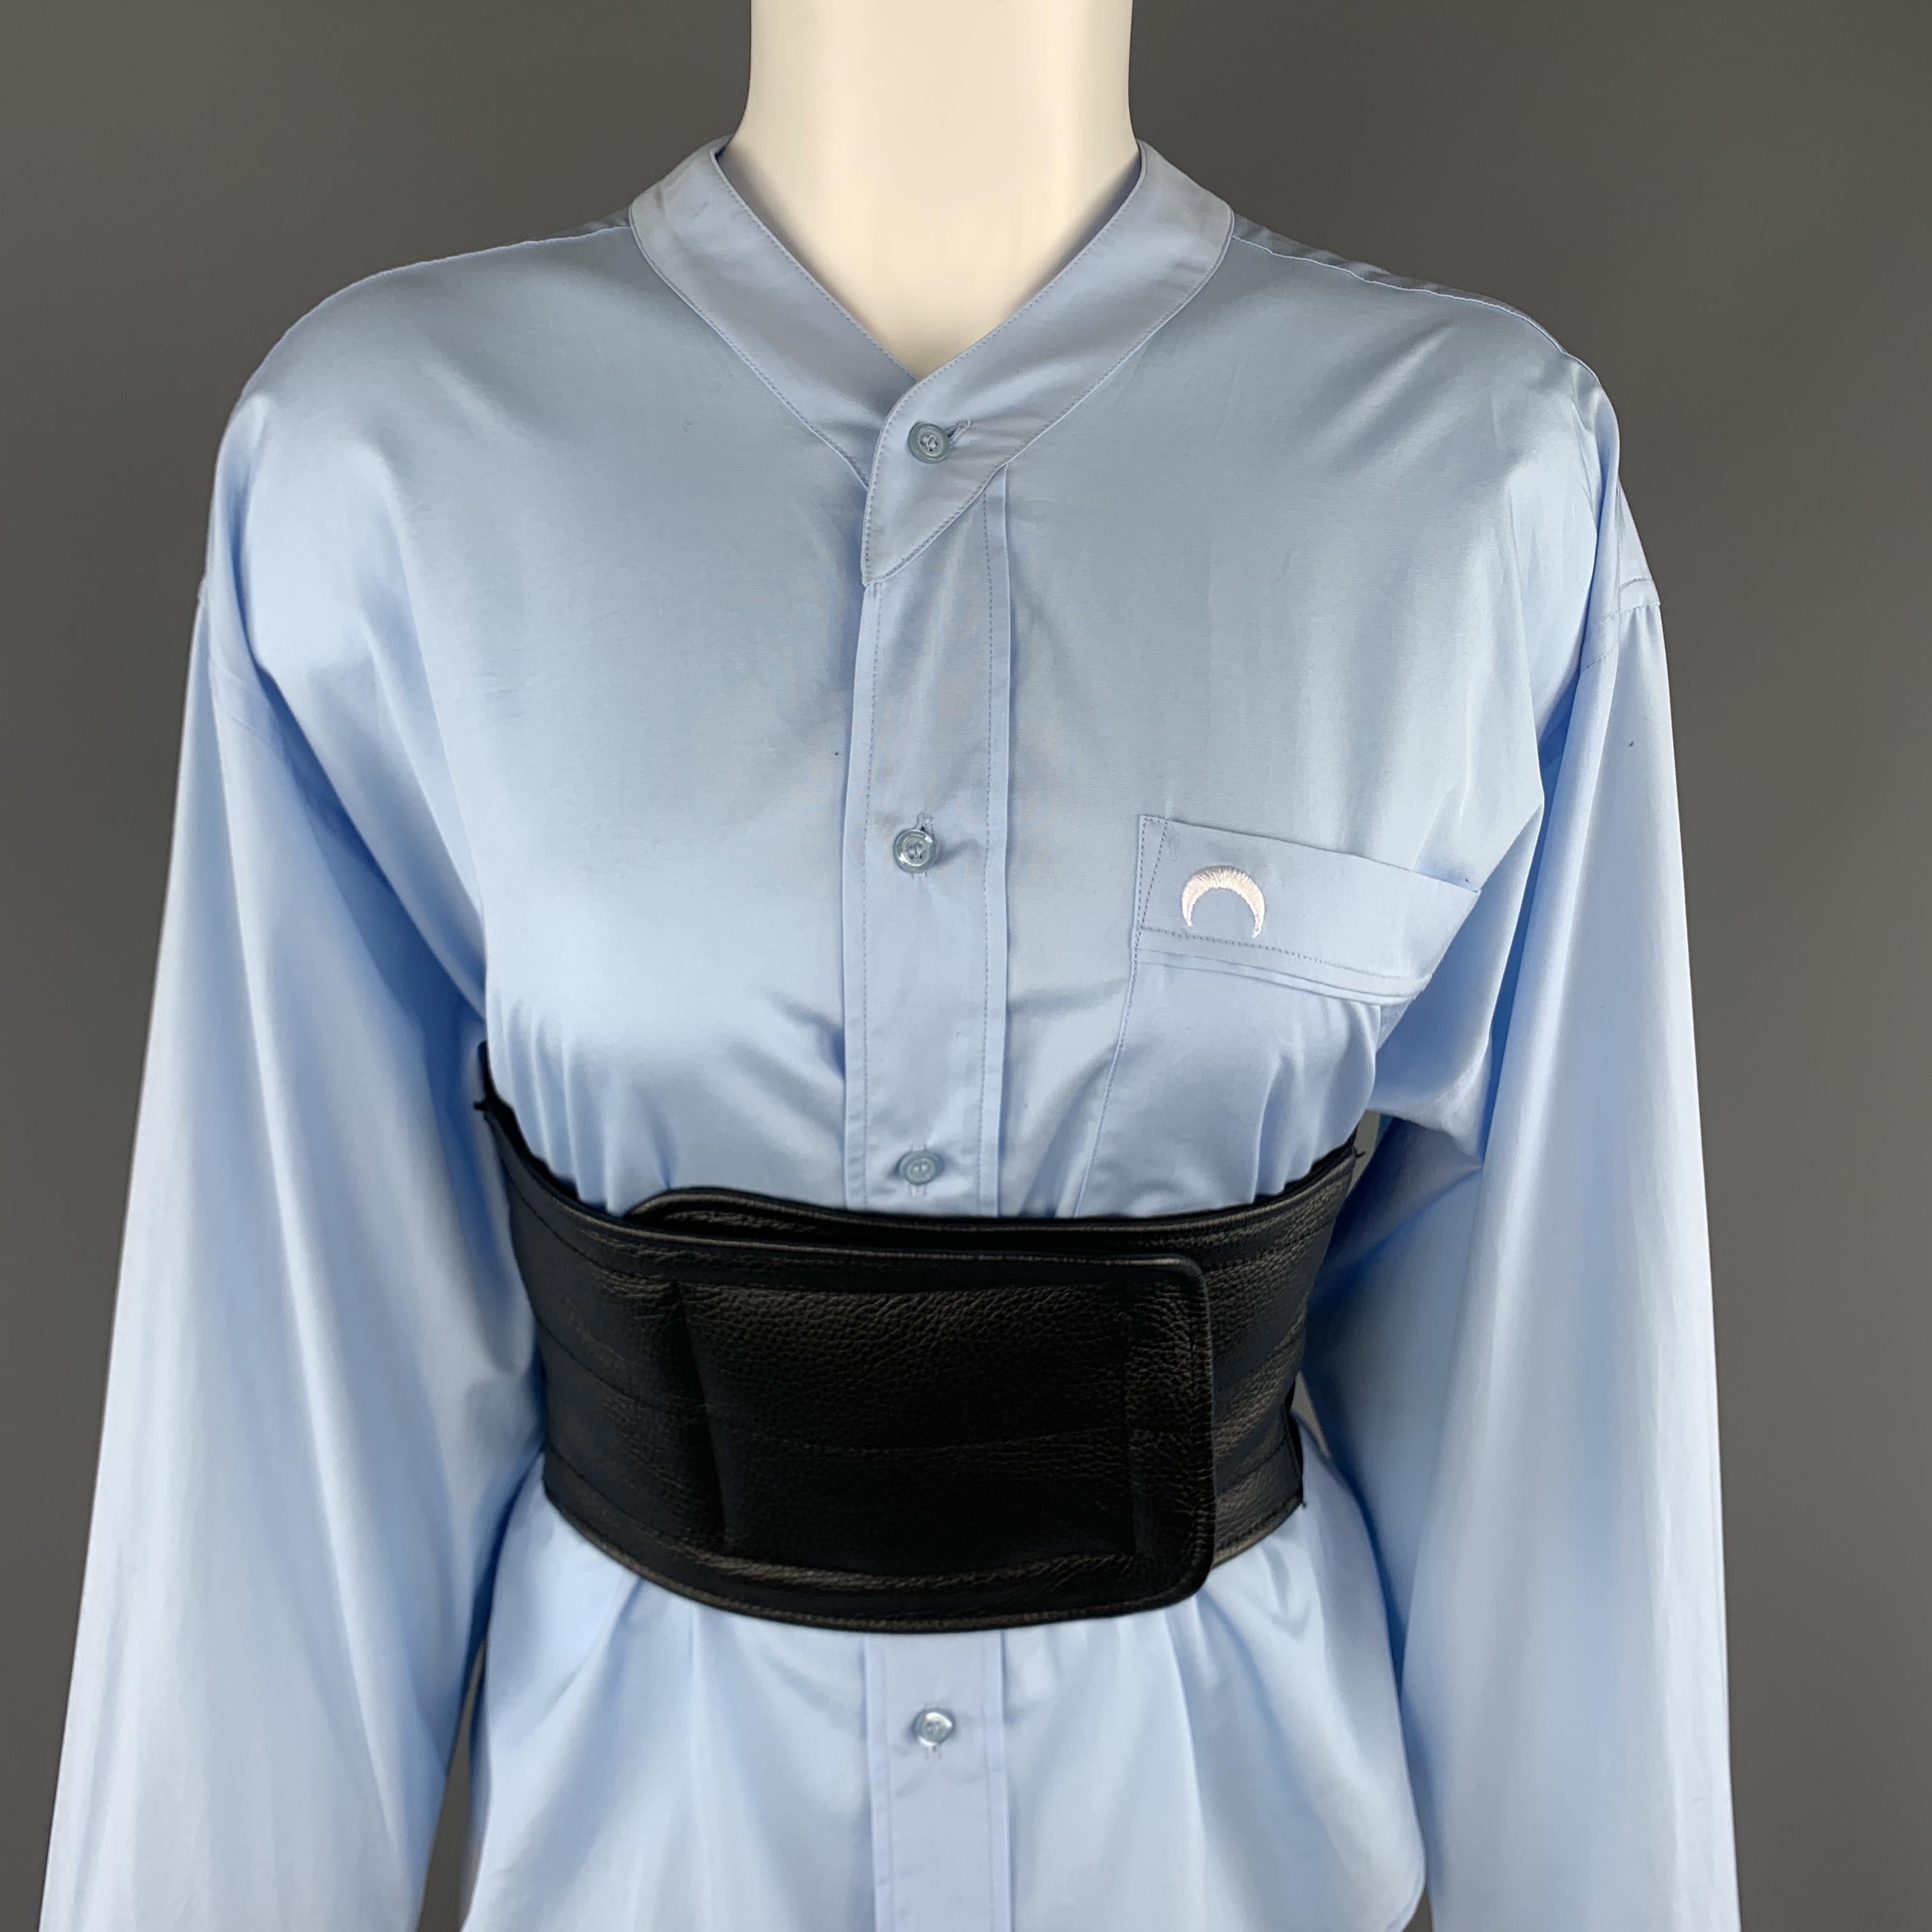 MARINE SERRE blouse come sin light blue cotton with a band collar, moon emblem, patch pocket, and attached stretch panel leather quilted bustier belt. With tags. Made in Italy.

Excellent Pre-Owned Condition.
Marked: L

Measurements:

Shoulder: 20